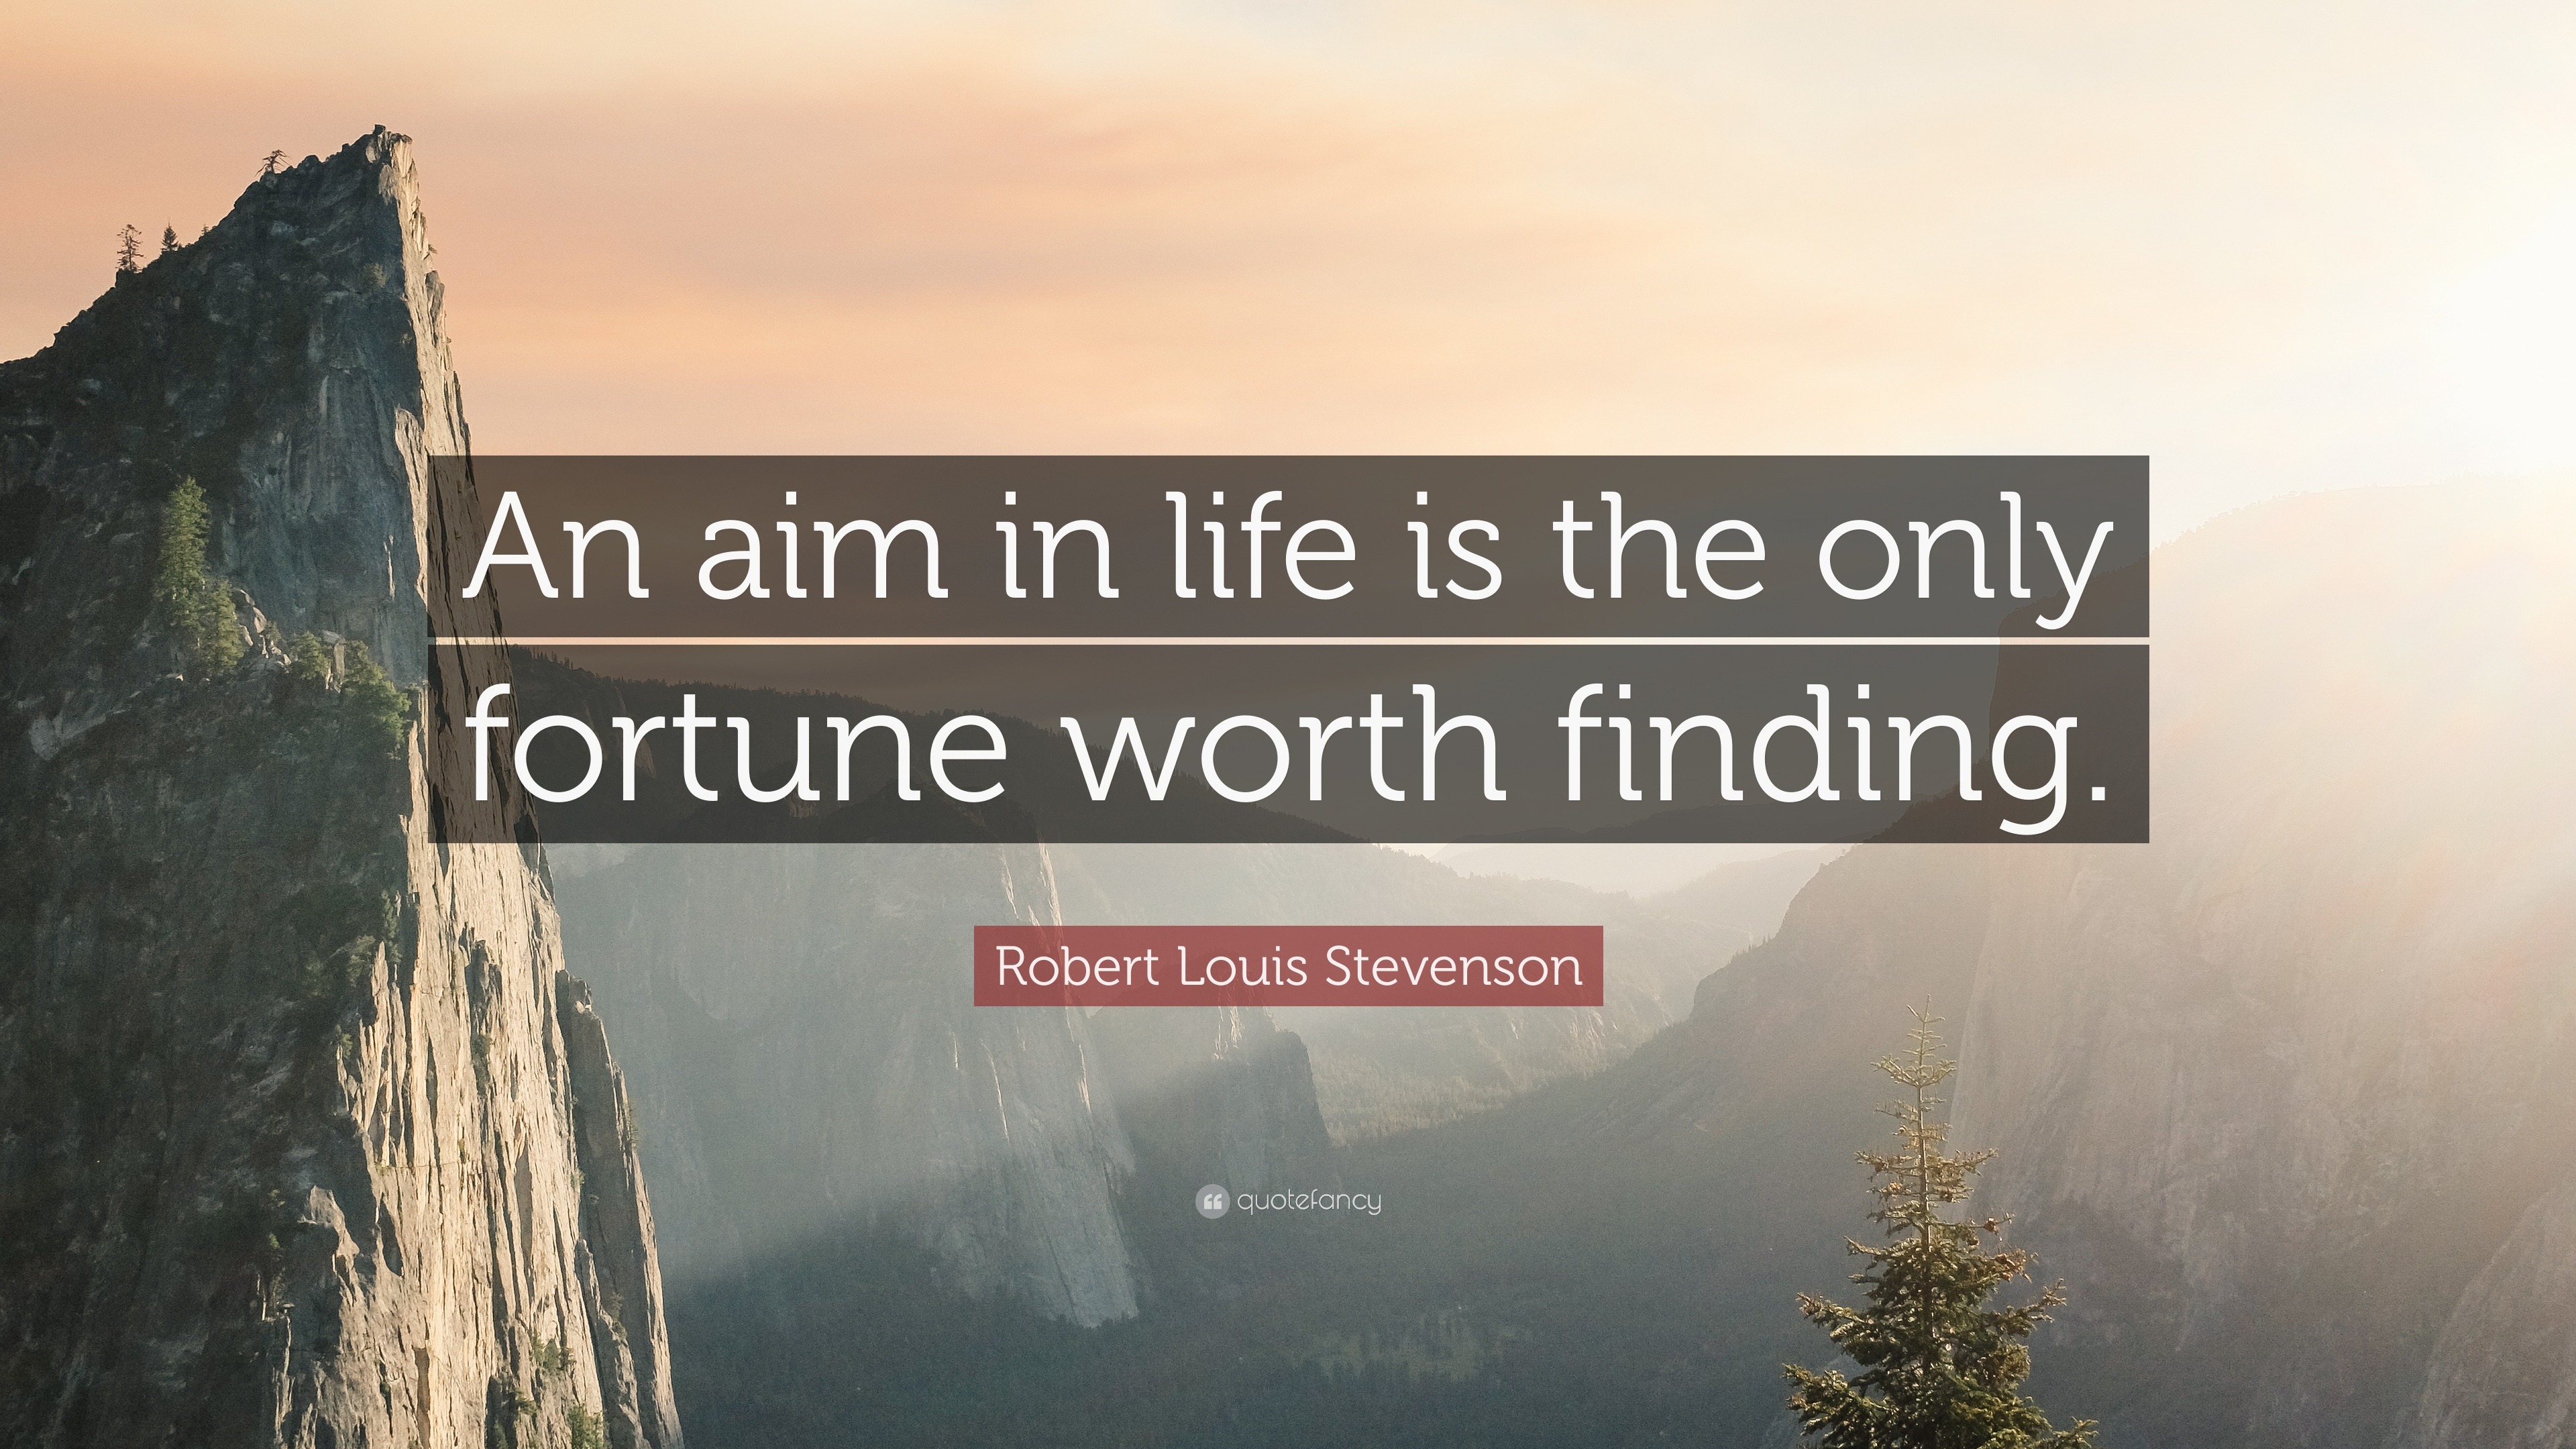 Robert Louis Stevenson Quote: “An aim in life is the only fortune worth finding.” (10 wallpapers ...